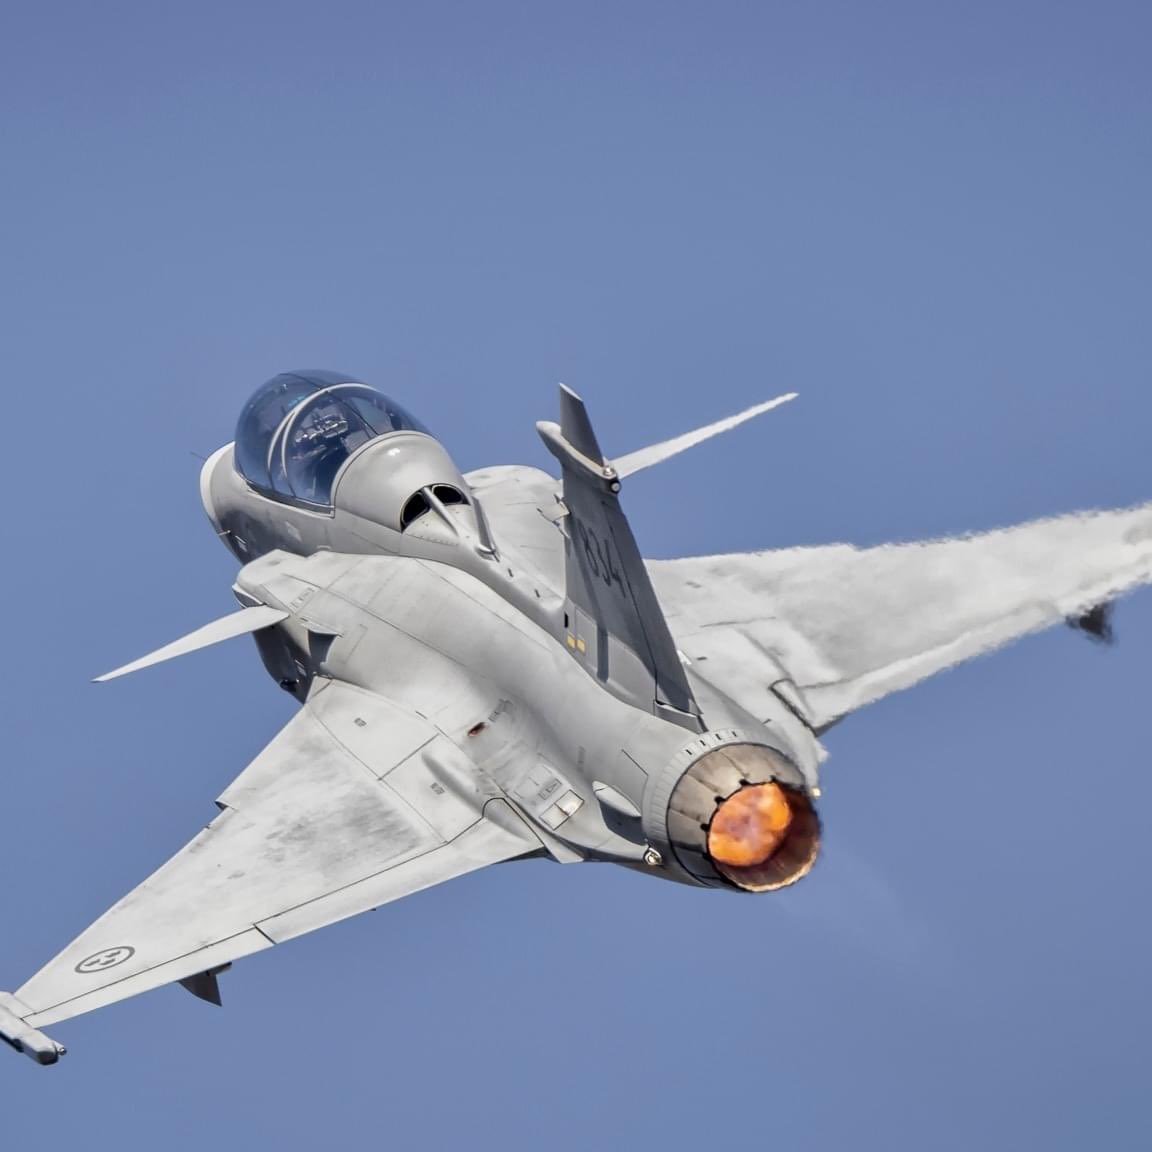 Swedish Air Force SAAB 39D Gripen has a delta wing and canard configuration with relaxed stabilitydesign and fly-by-wire flight controls. Later aircraft are fully NATO interoperable. As of 2020, more than 271 Gripens of all models, A–F, have been delivered